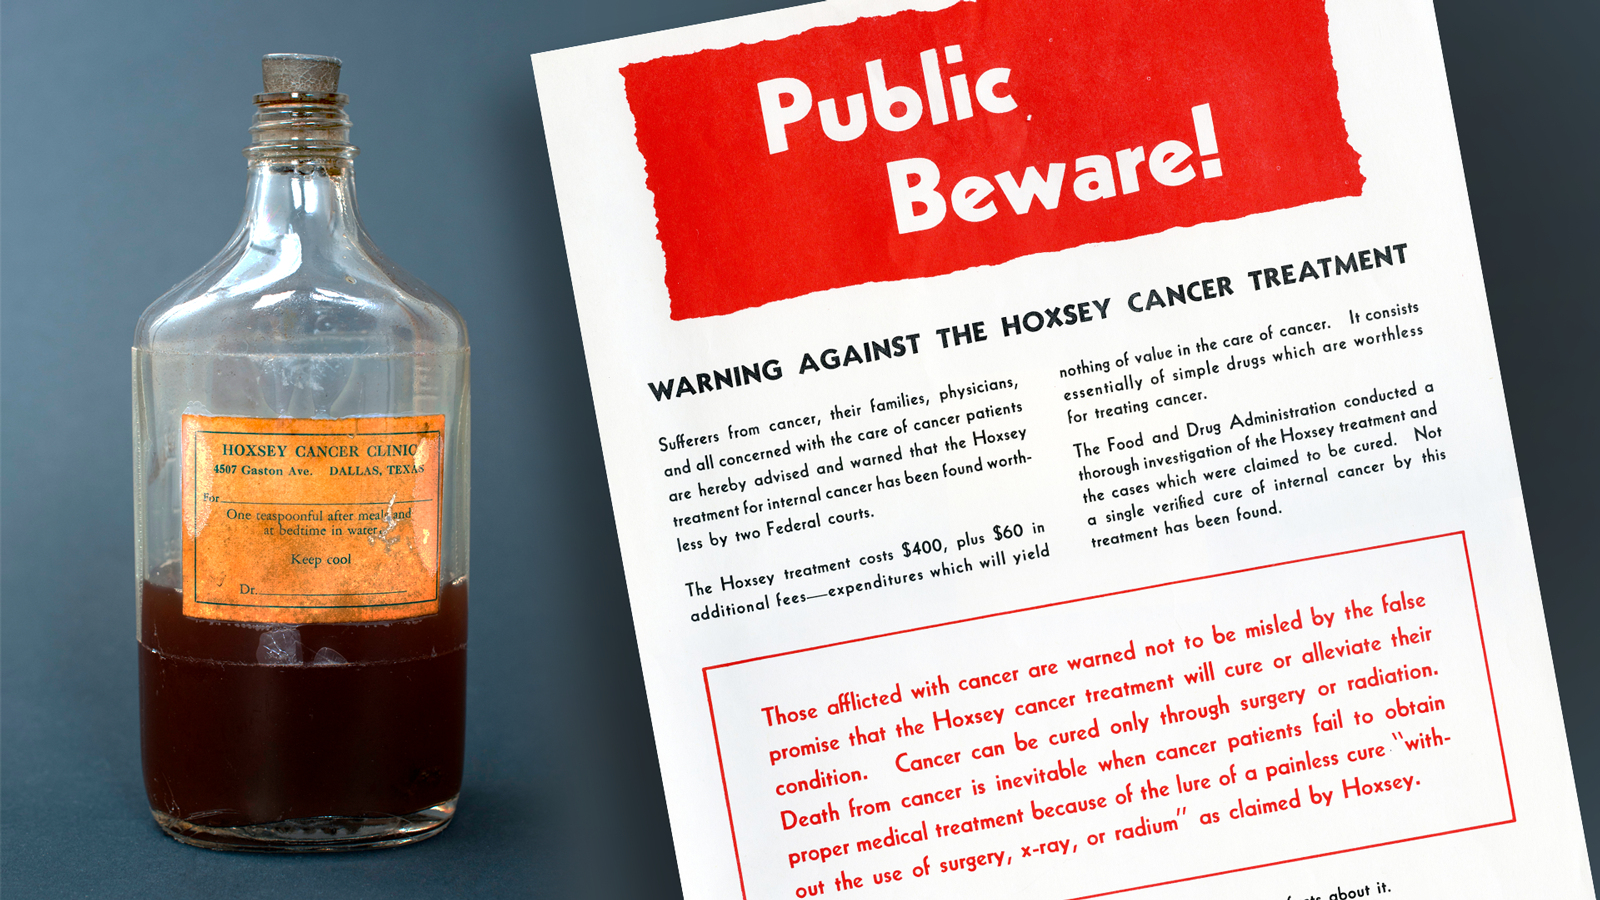 Hoxey Cancer Treatment fraudulent product and FDA warning poster.